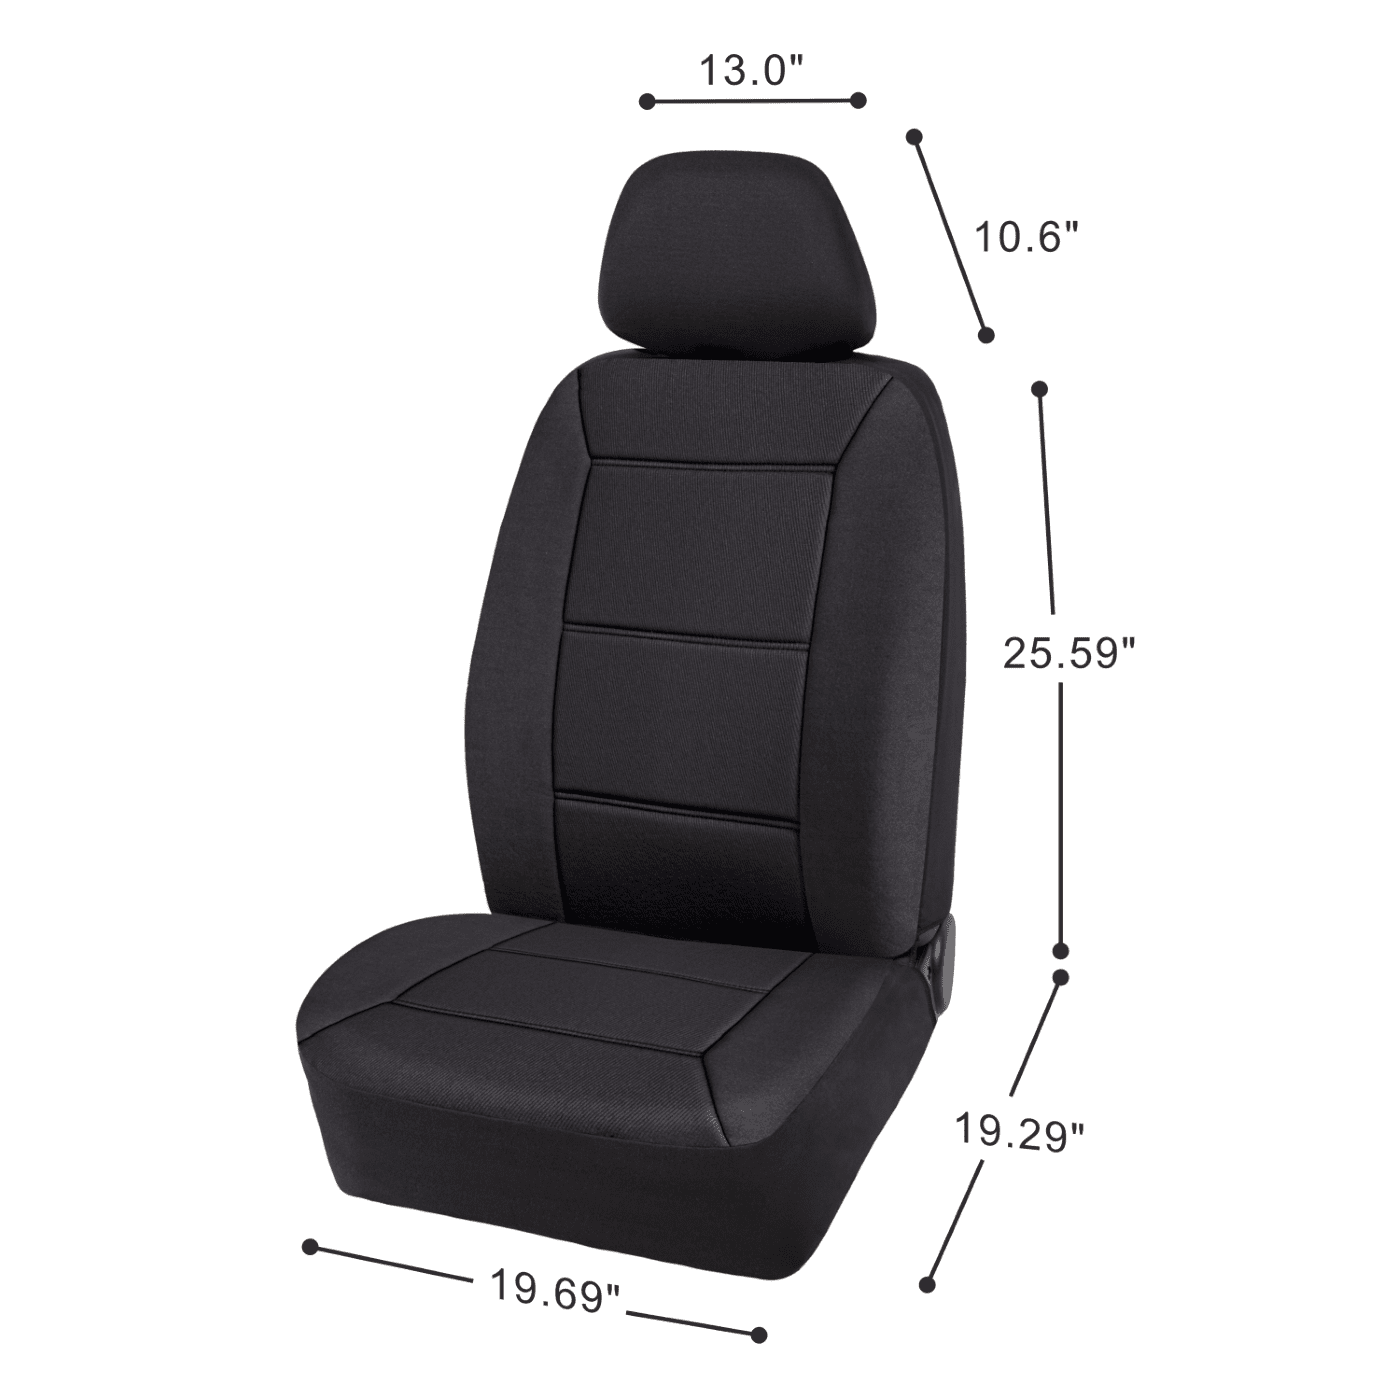 Auto Drive 2 Piece Low Back Memory Foam Car Seat Cover Polyester